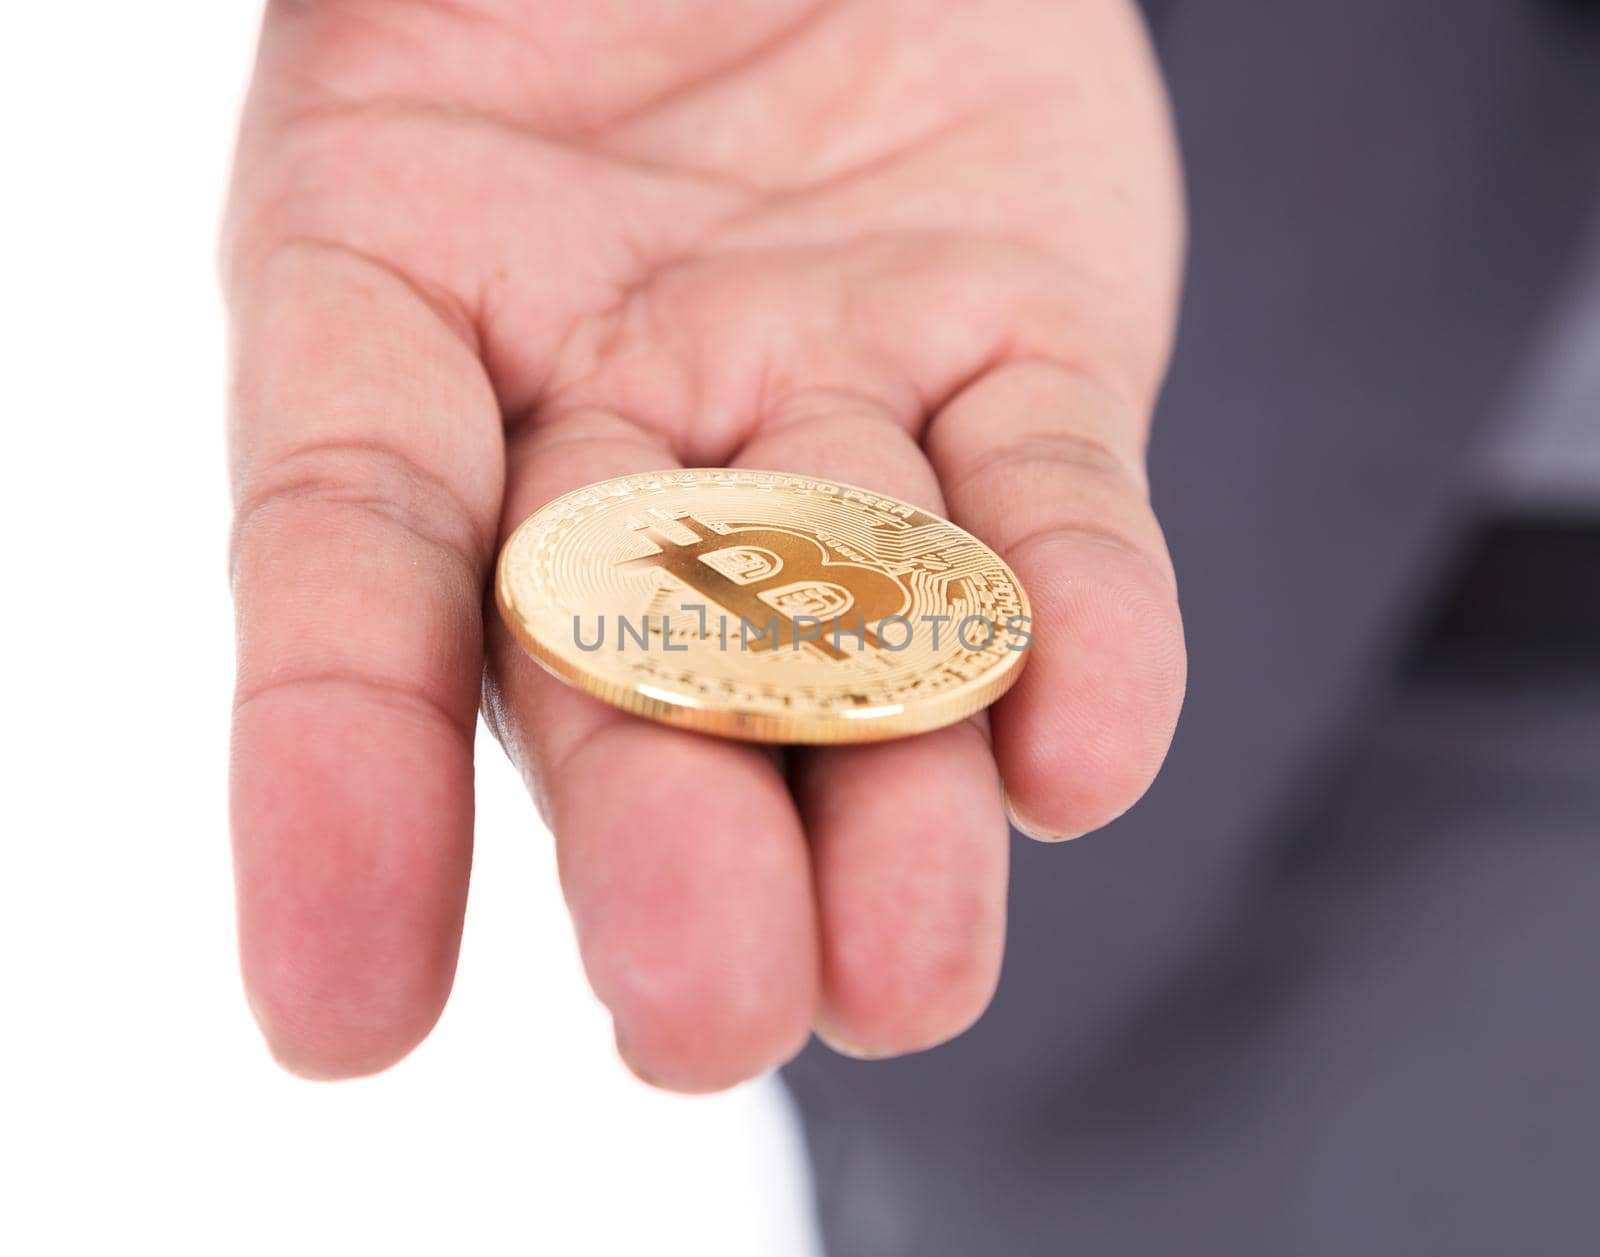 bitcoin in hand of business man with suit isolated on white background